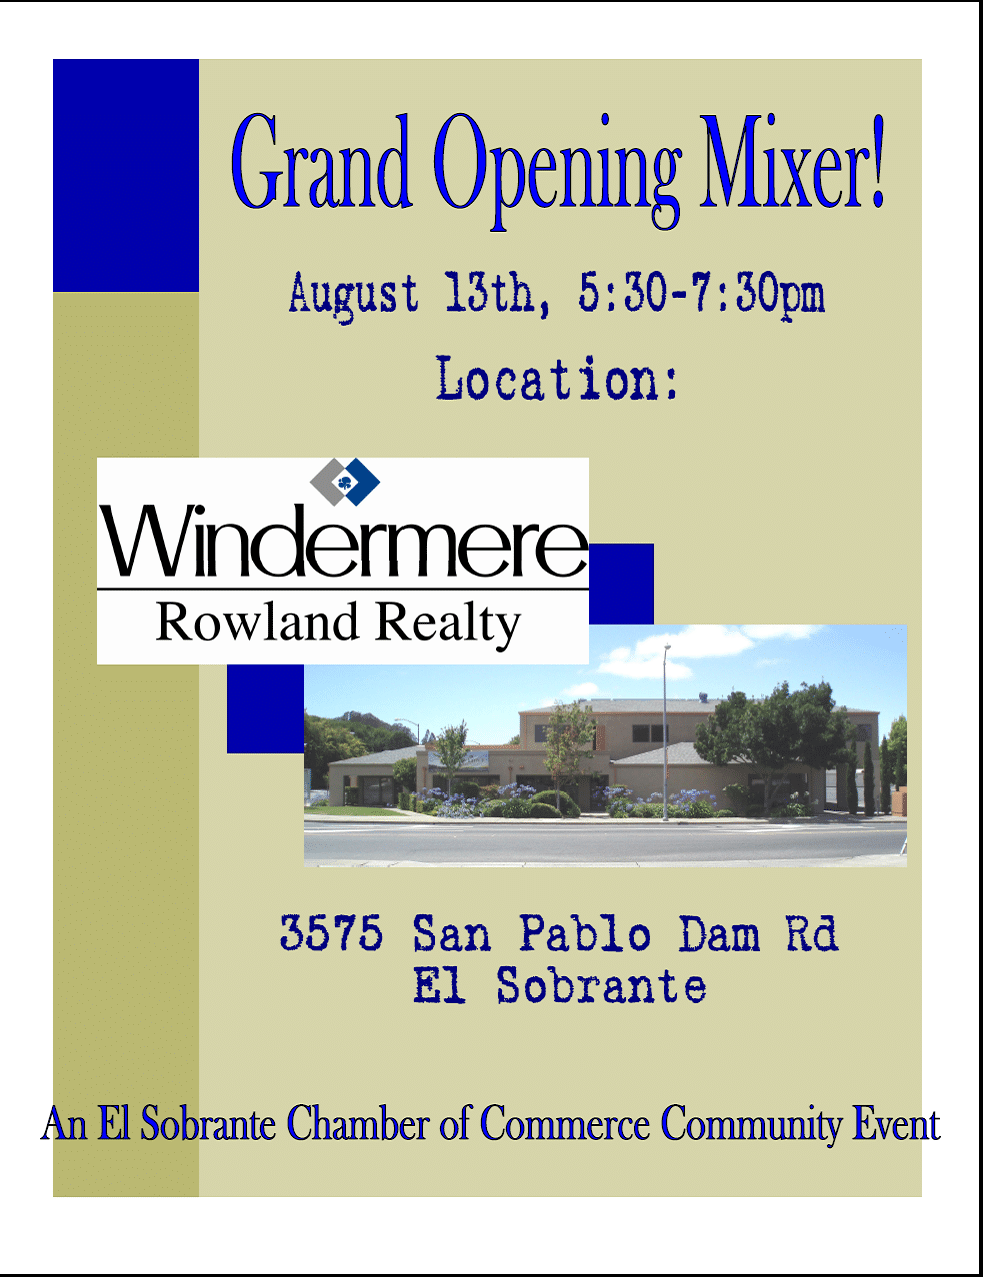 Winderemere Grand Opening